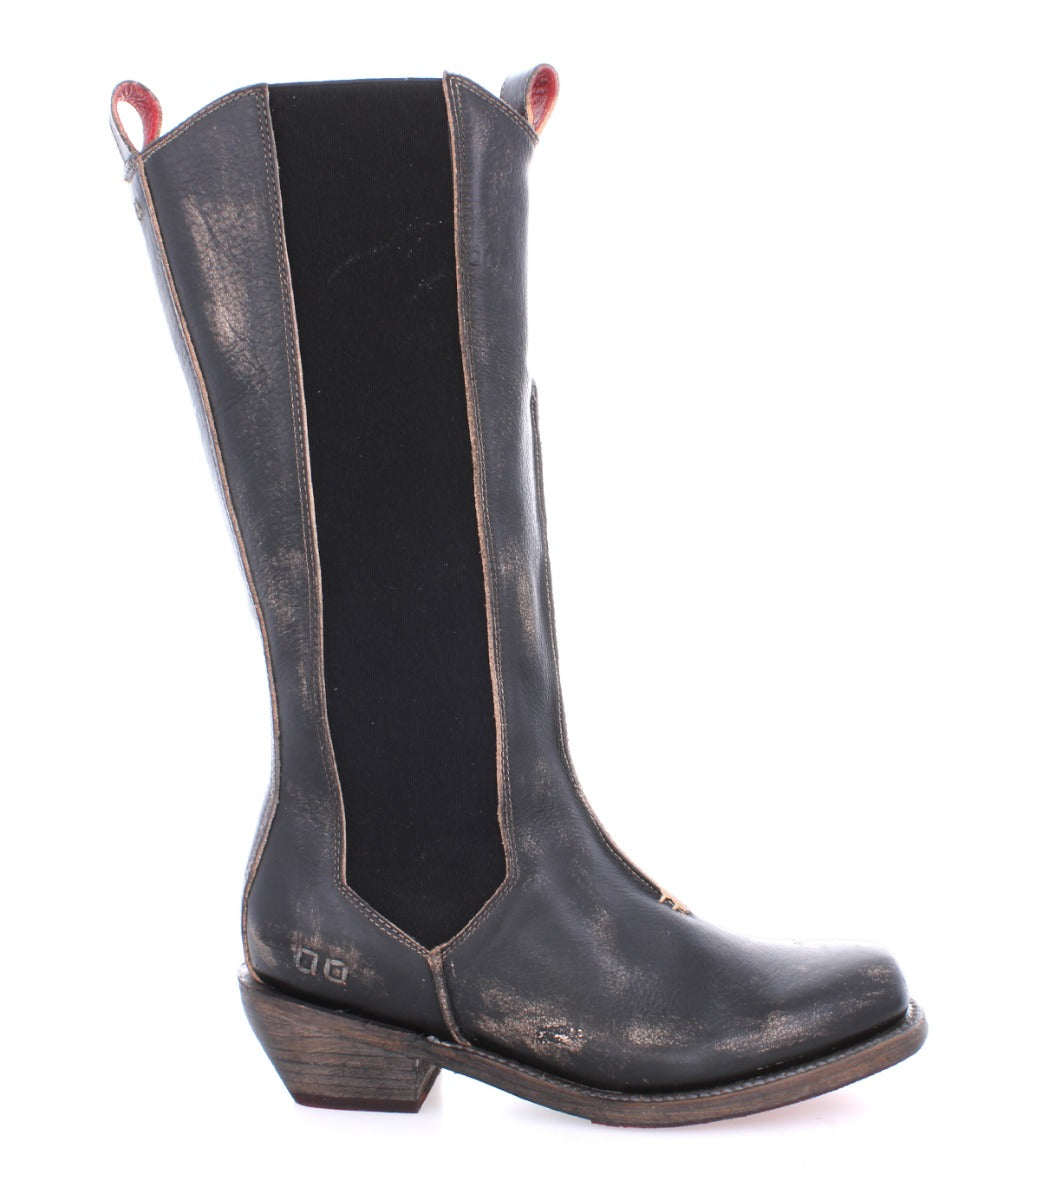 A women's Clarisse cowboy boot by Bed Stu with a red sole.